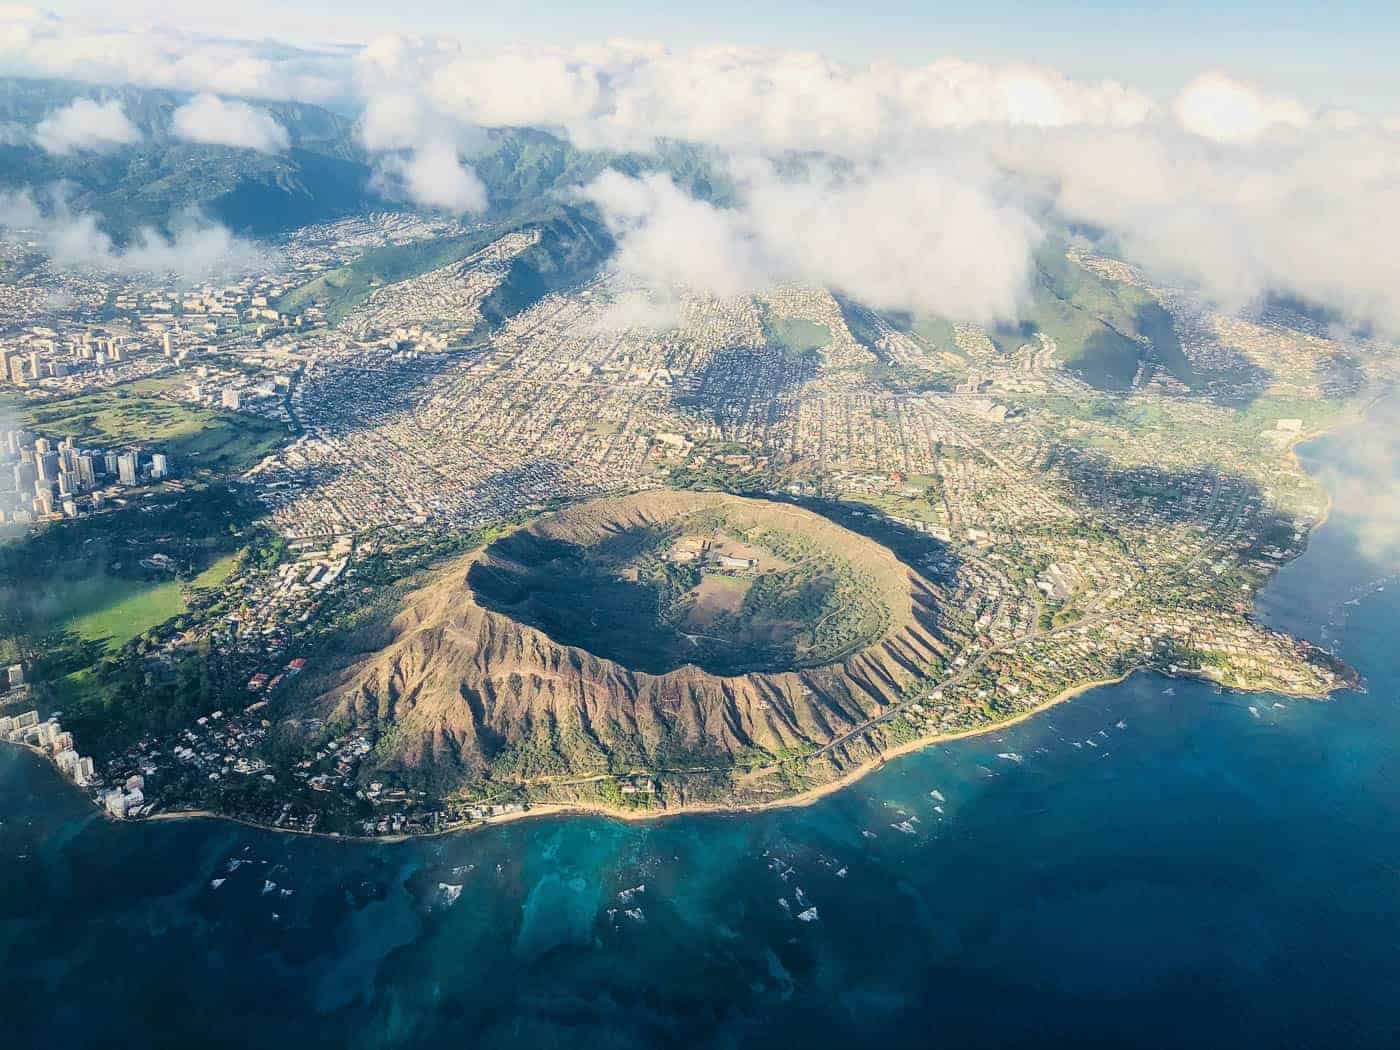 How to Pick the Best Hawaiian Island For Your First Trip